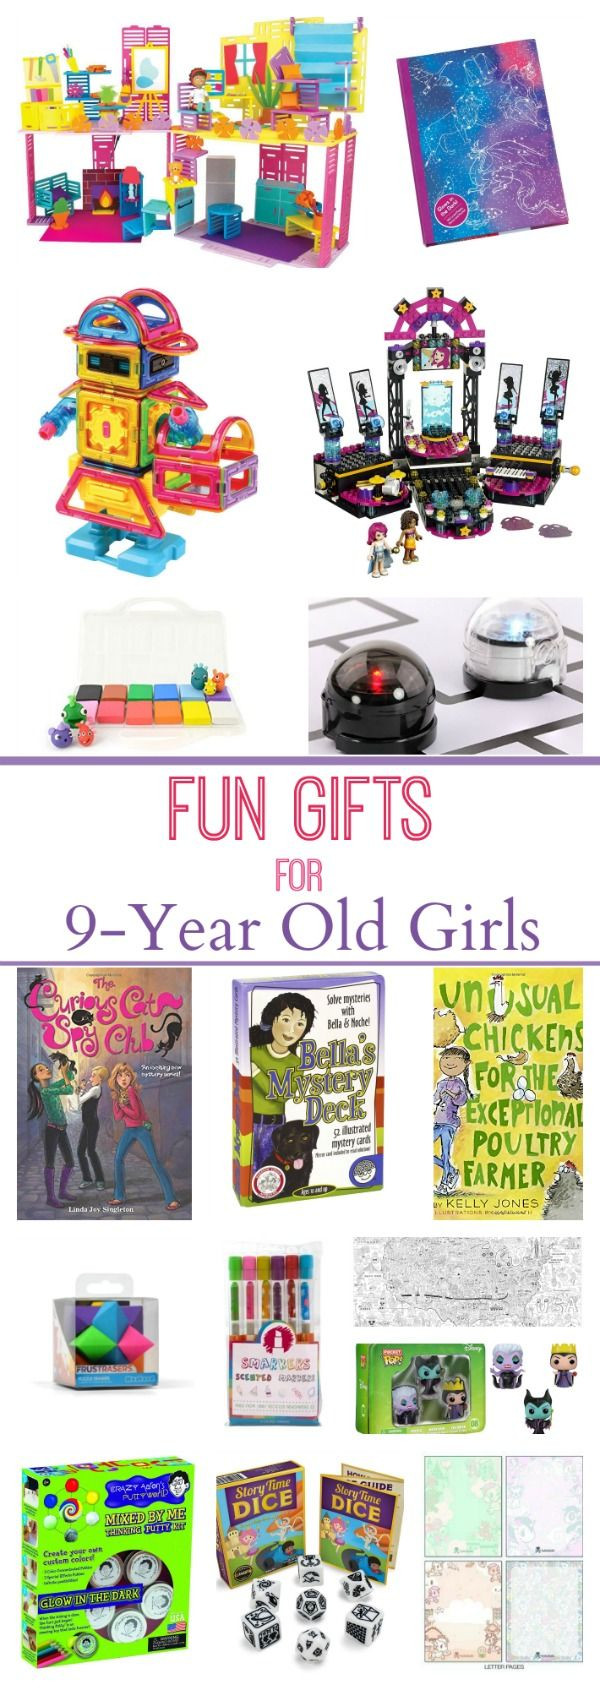 Birthday Gifts For 9 Year Old Girls
 Gifts for 9 Year Old Girls